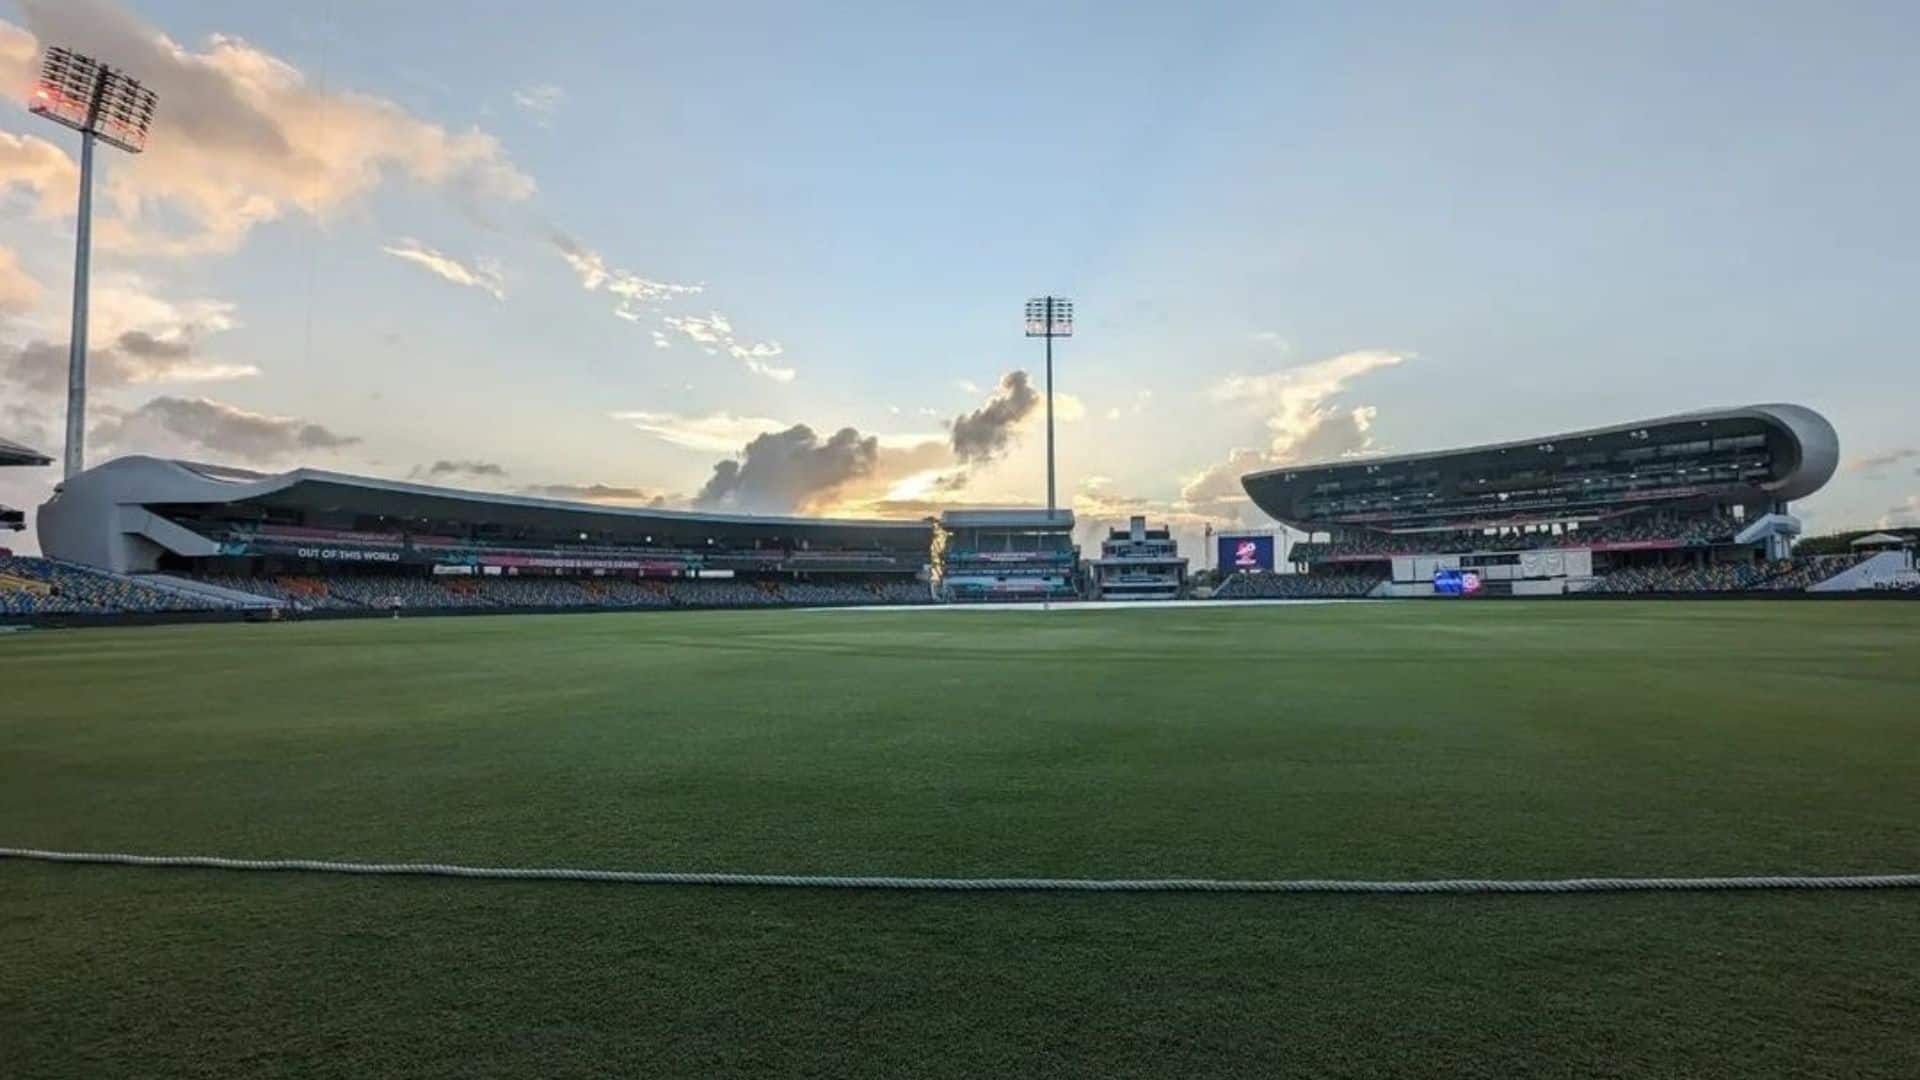 Kensington Oval Barbados Pitch Report For WI vs USA T20 World Cup Super 8 Match